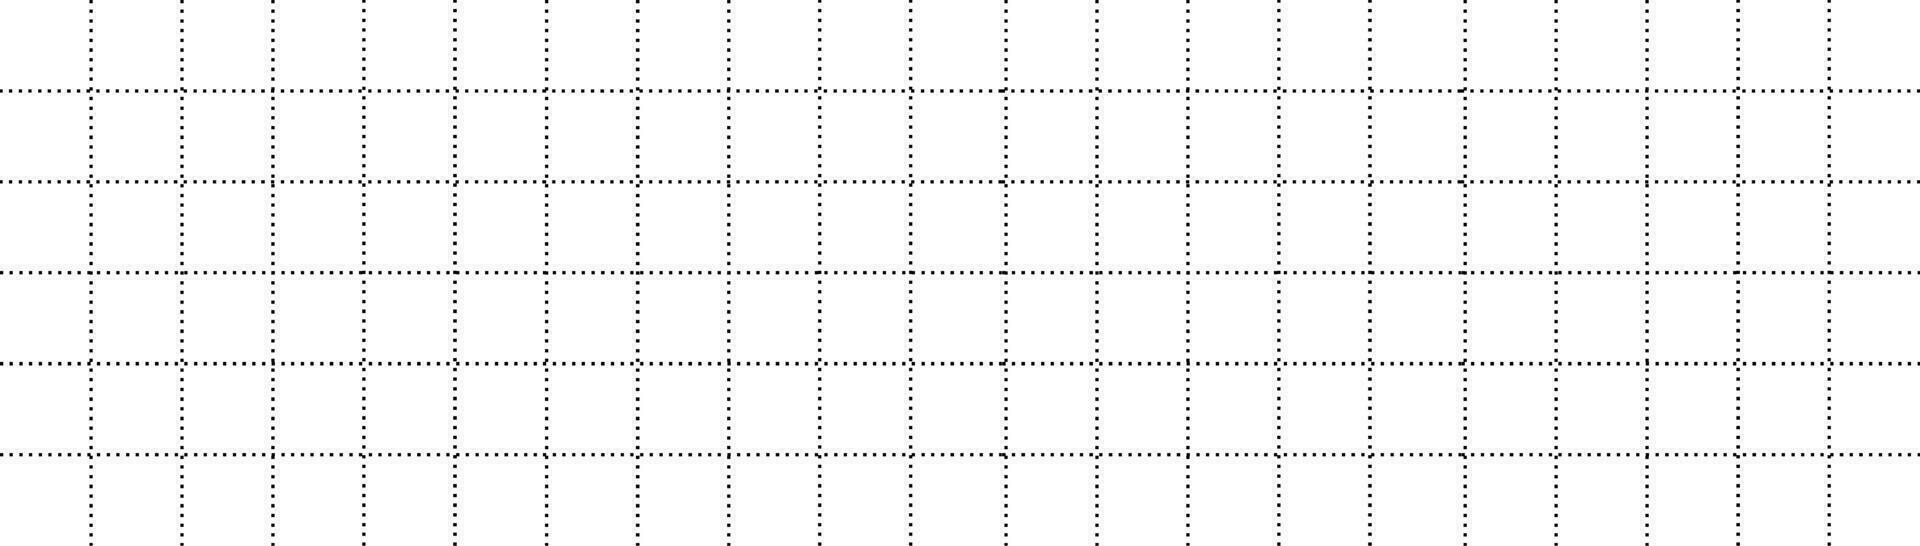 Geometric squares grid background. Drawing blank white template with black lines for drafting and technical design with millimeter vector markings